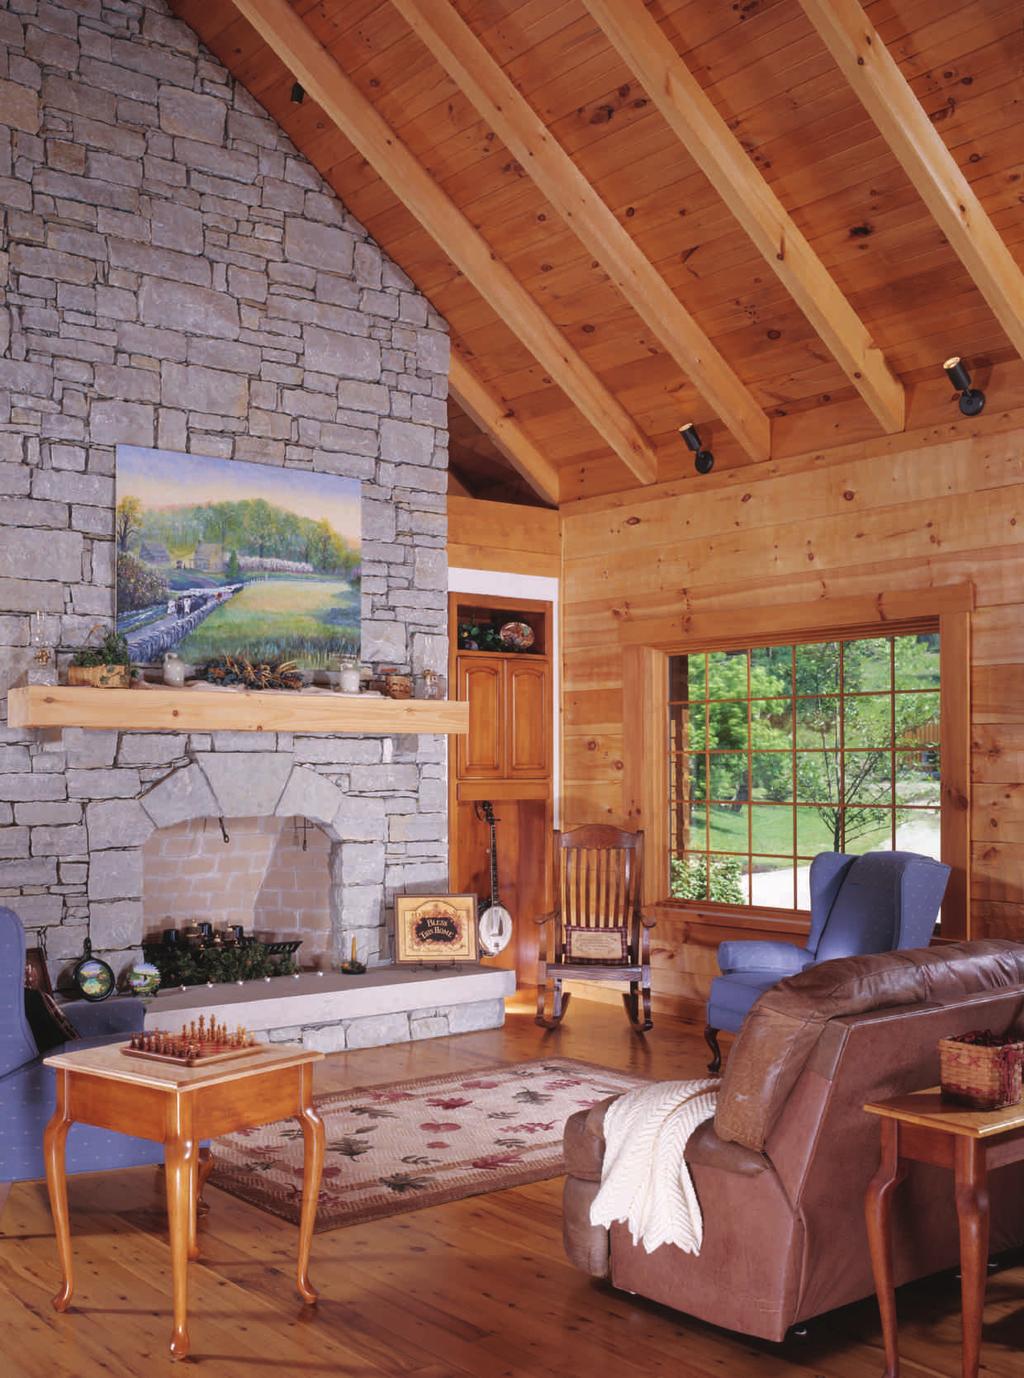 The work of art that hangs above the mantel is an original oil painting of the 1850 farmstead.